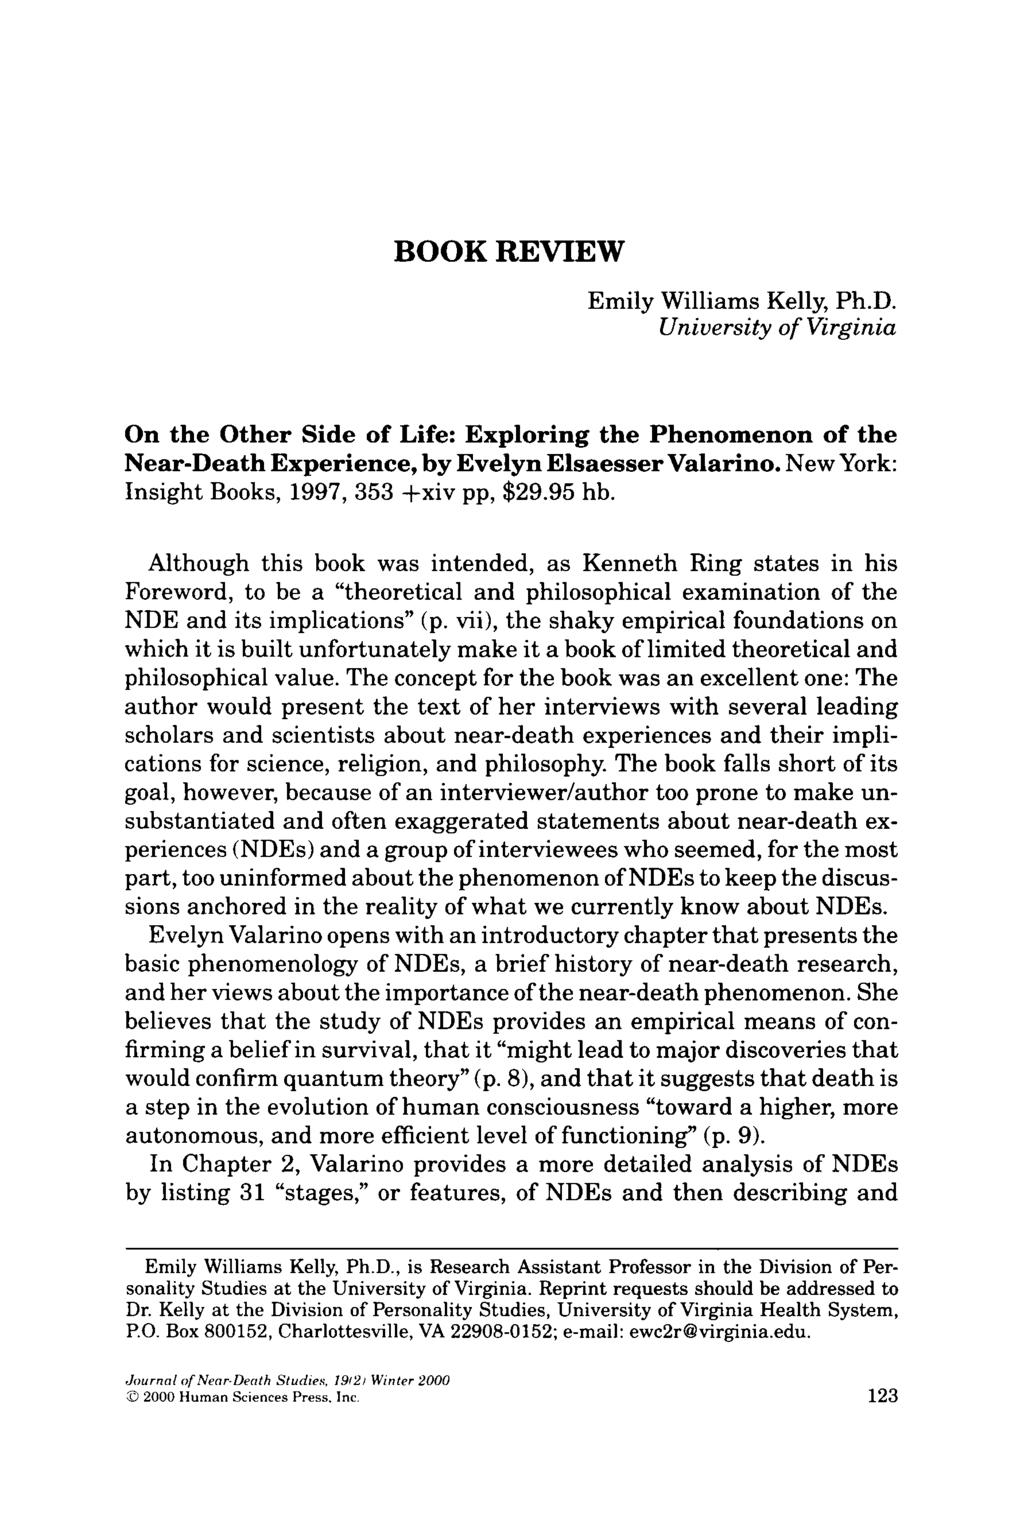 BOOK REVIEW Emily Williams Kelly, Ph.D. University of Virginia On the Other Side of Life: Exploring the Phenomenon of the Near-Death Experience, by Evelyn Elsaesser Valarino.